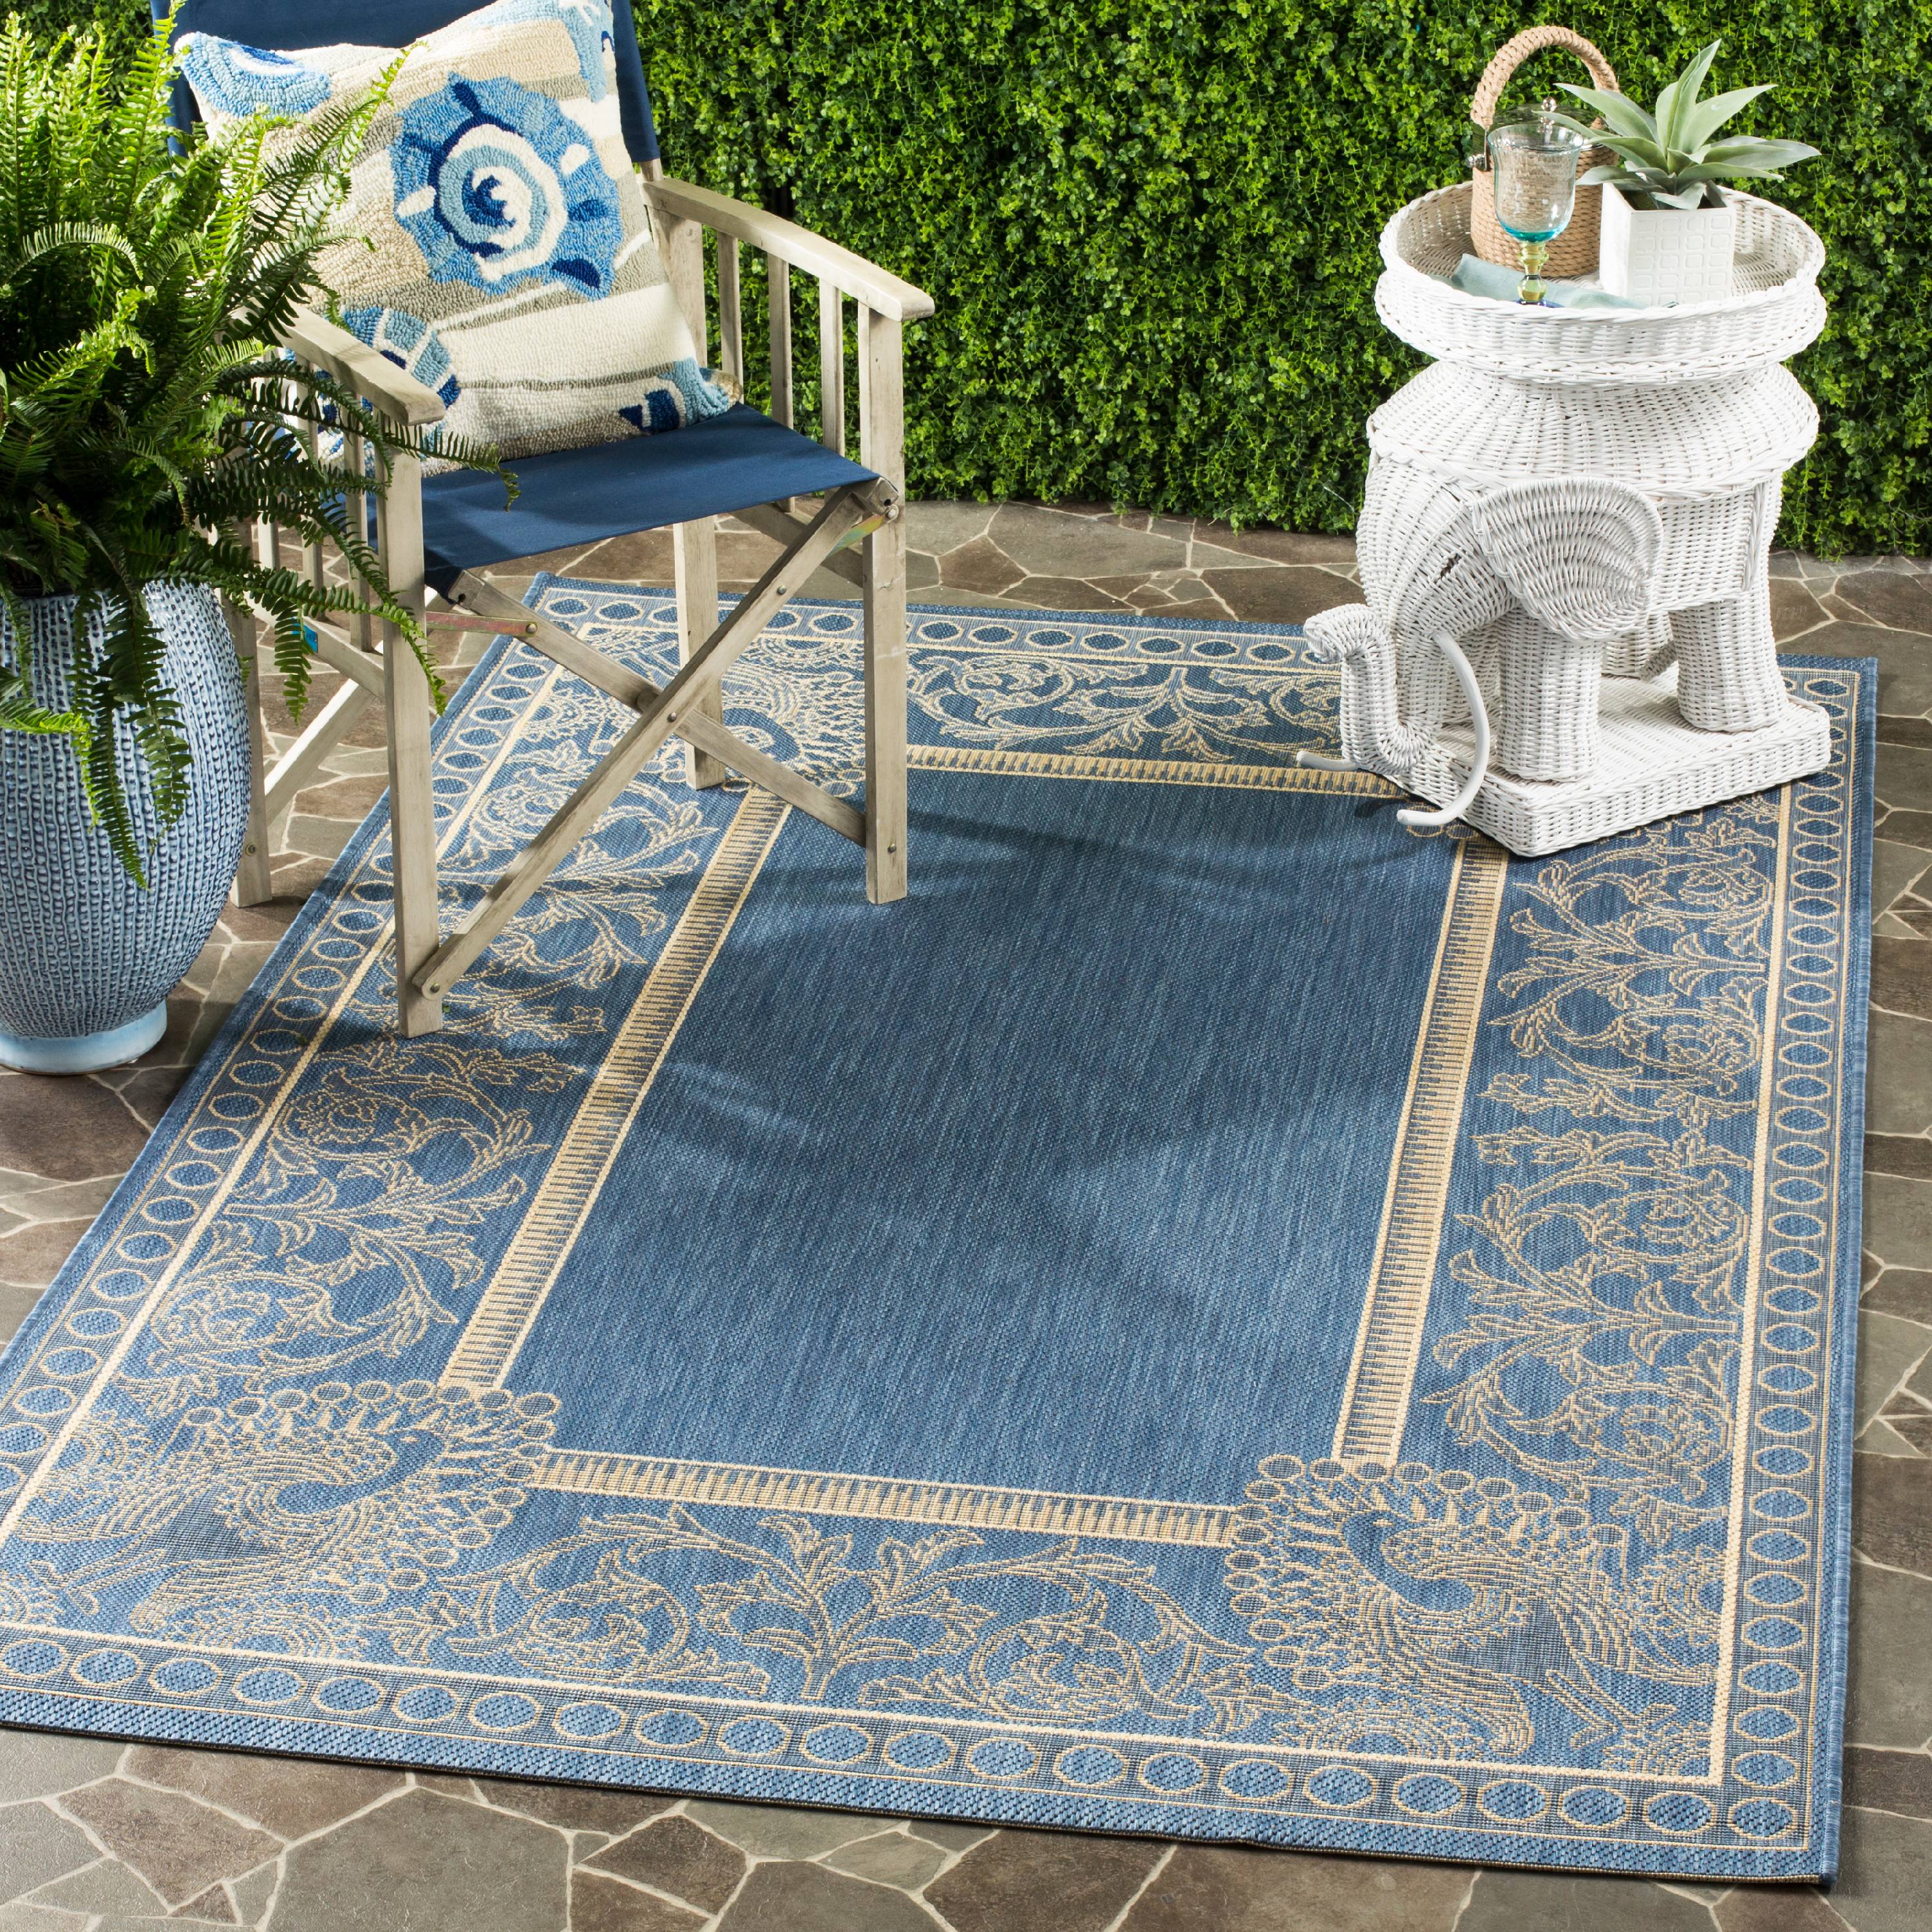 SAFAVIEH Courtyard Cooper Floral Indoor/Outdoor Area Rug, 5'3" x 7'7", Blue/Natural - image 1 of 3